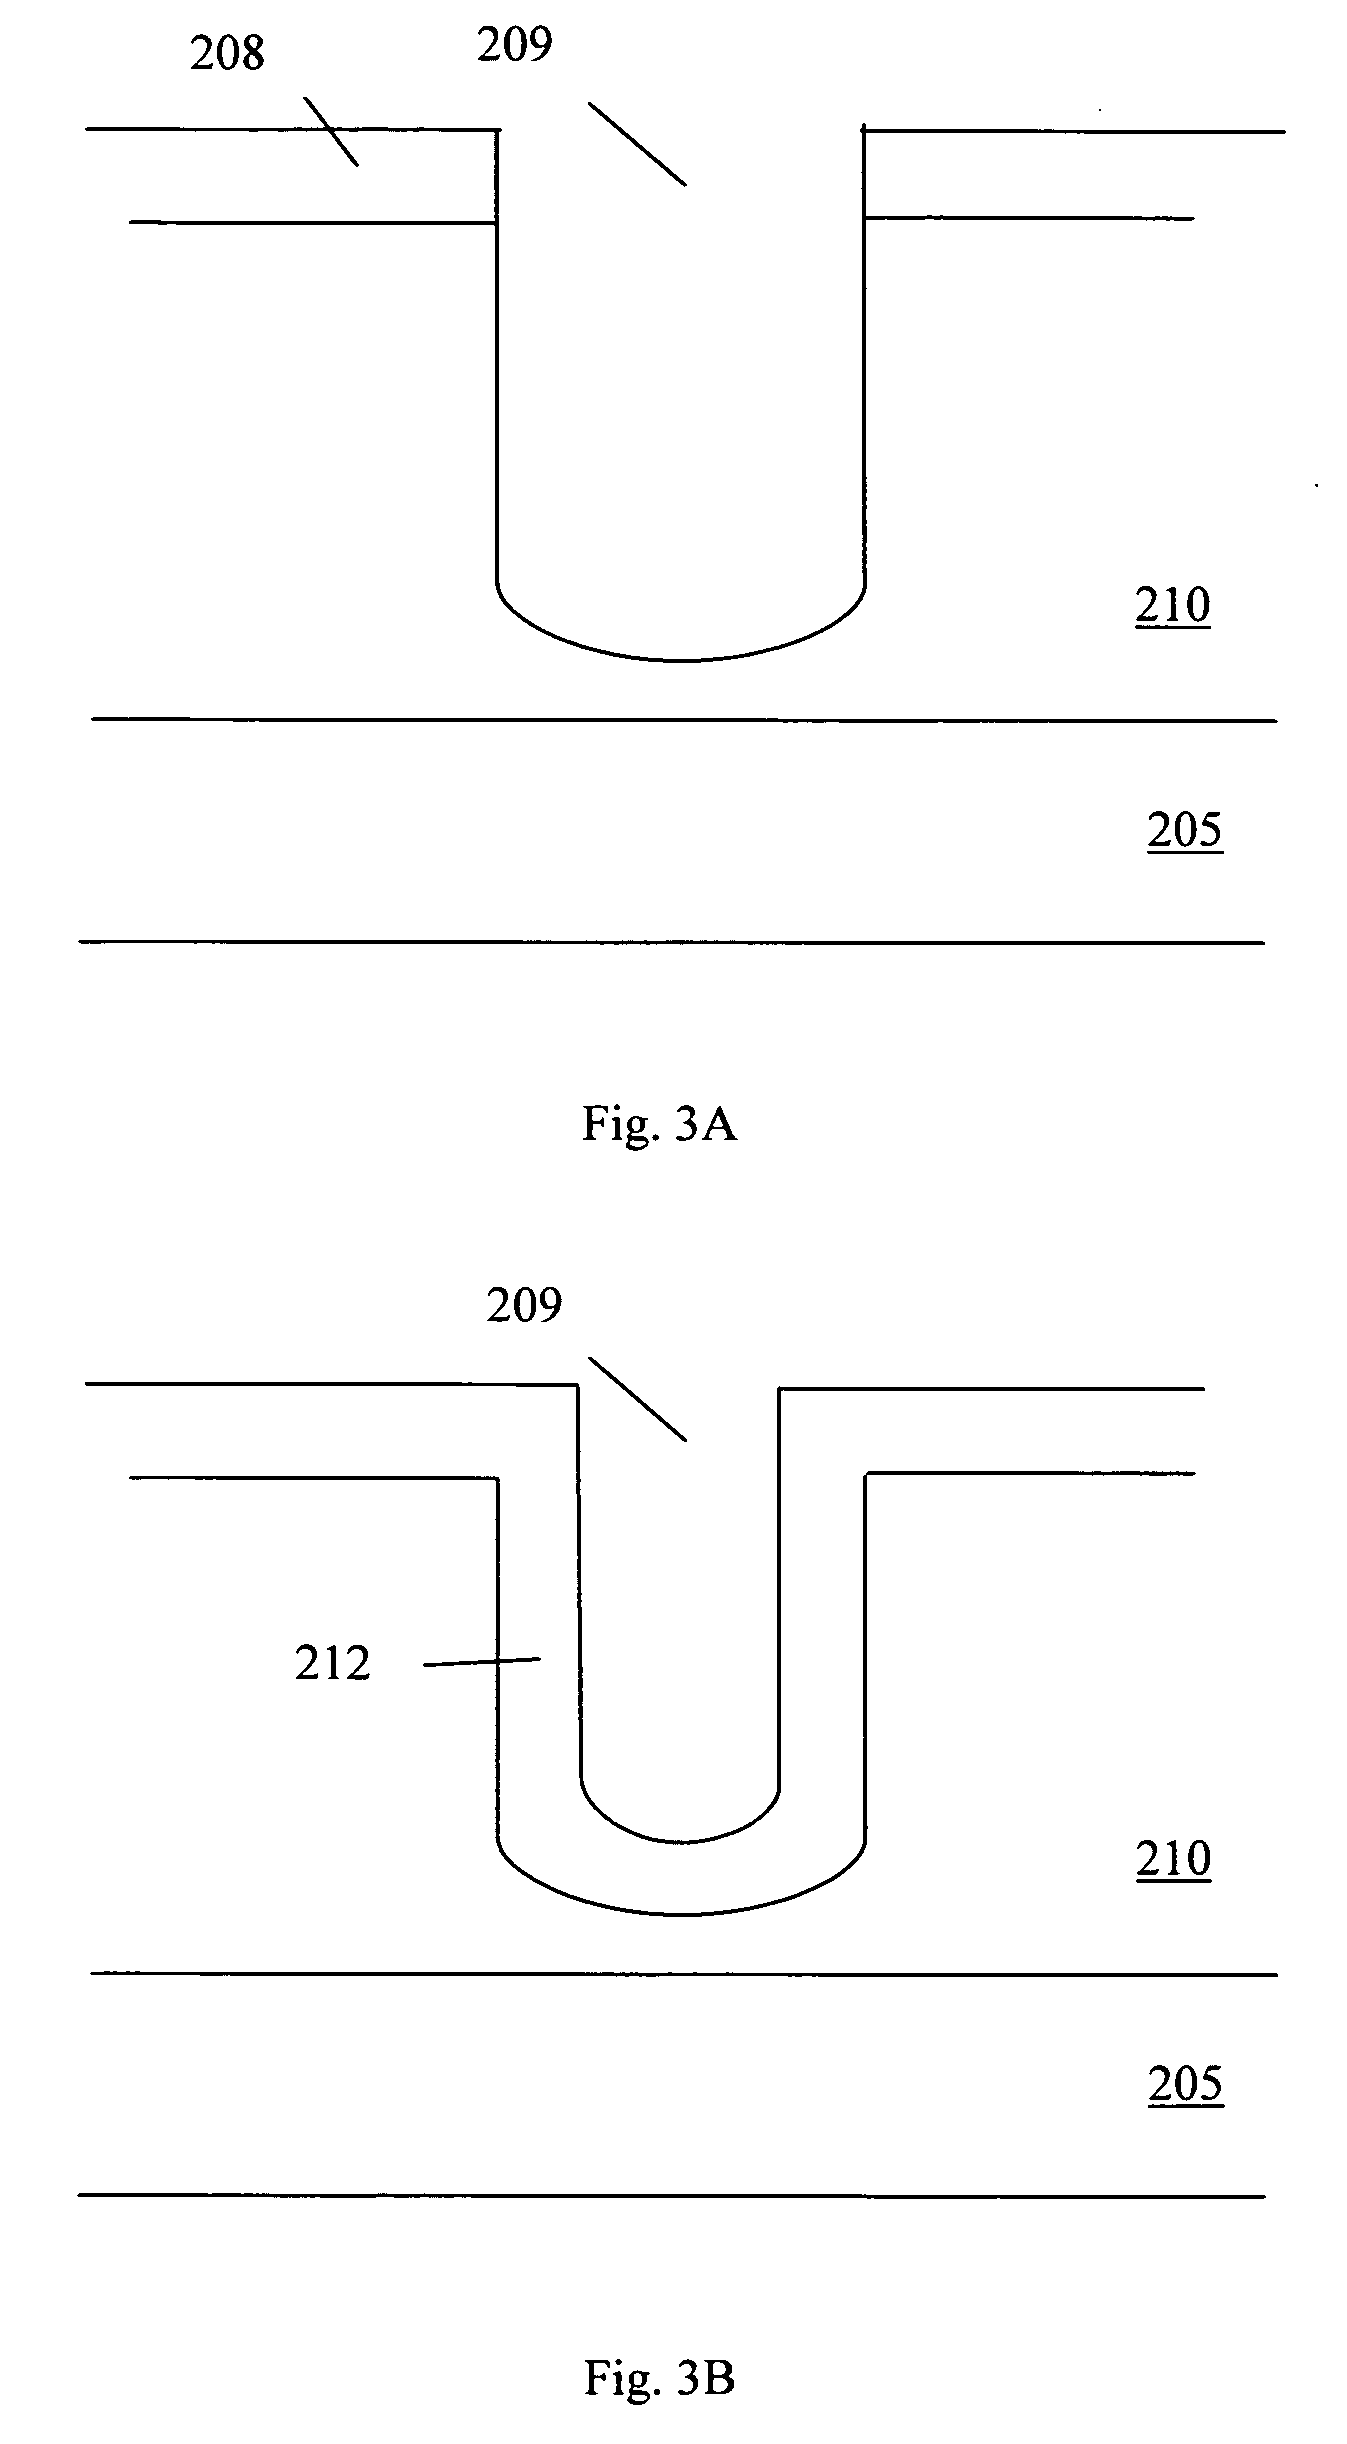 Split gate formation with high density plasma (HDP) oxide layer as inter-polysilicon insulation layer